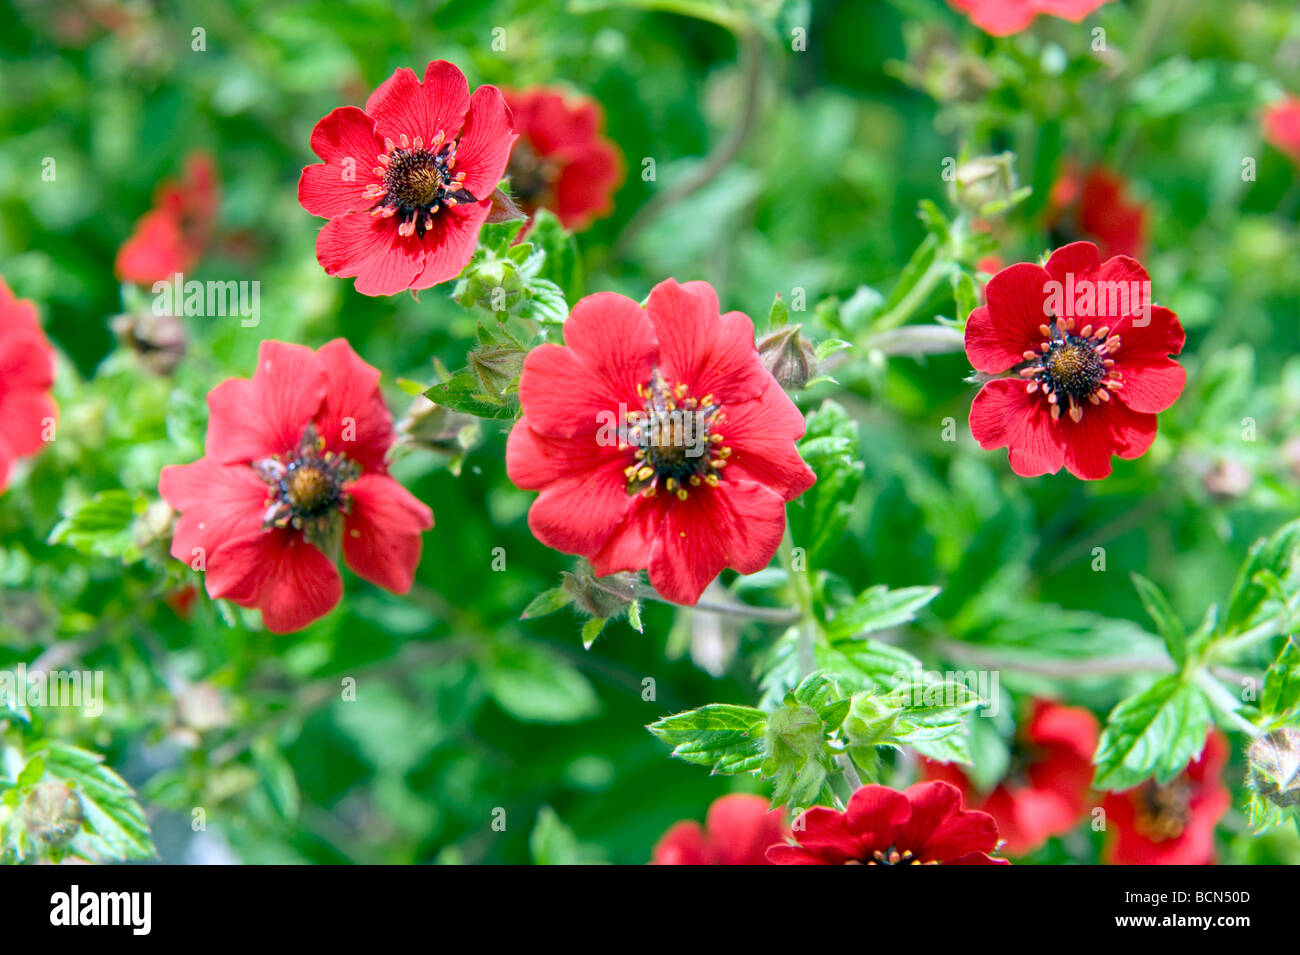 Potentilla Comarum Cinquefoil Rosaceae 'Gibson's Scarlet'. Beautiful bright red poppy like flower. Stock Photo